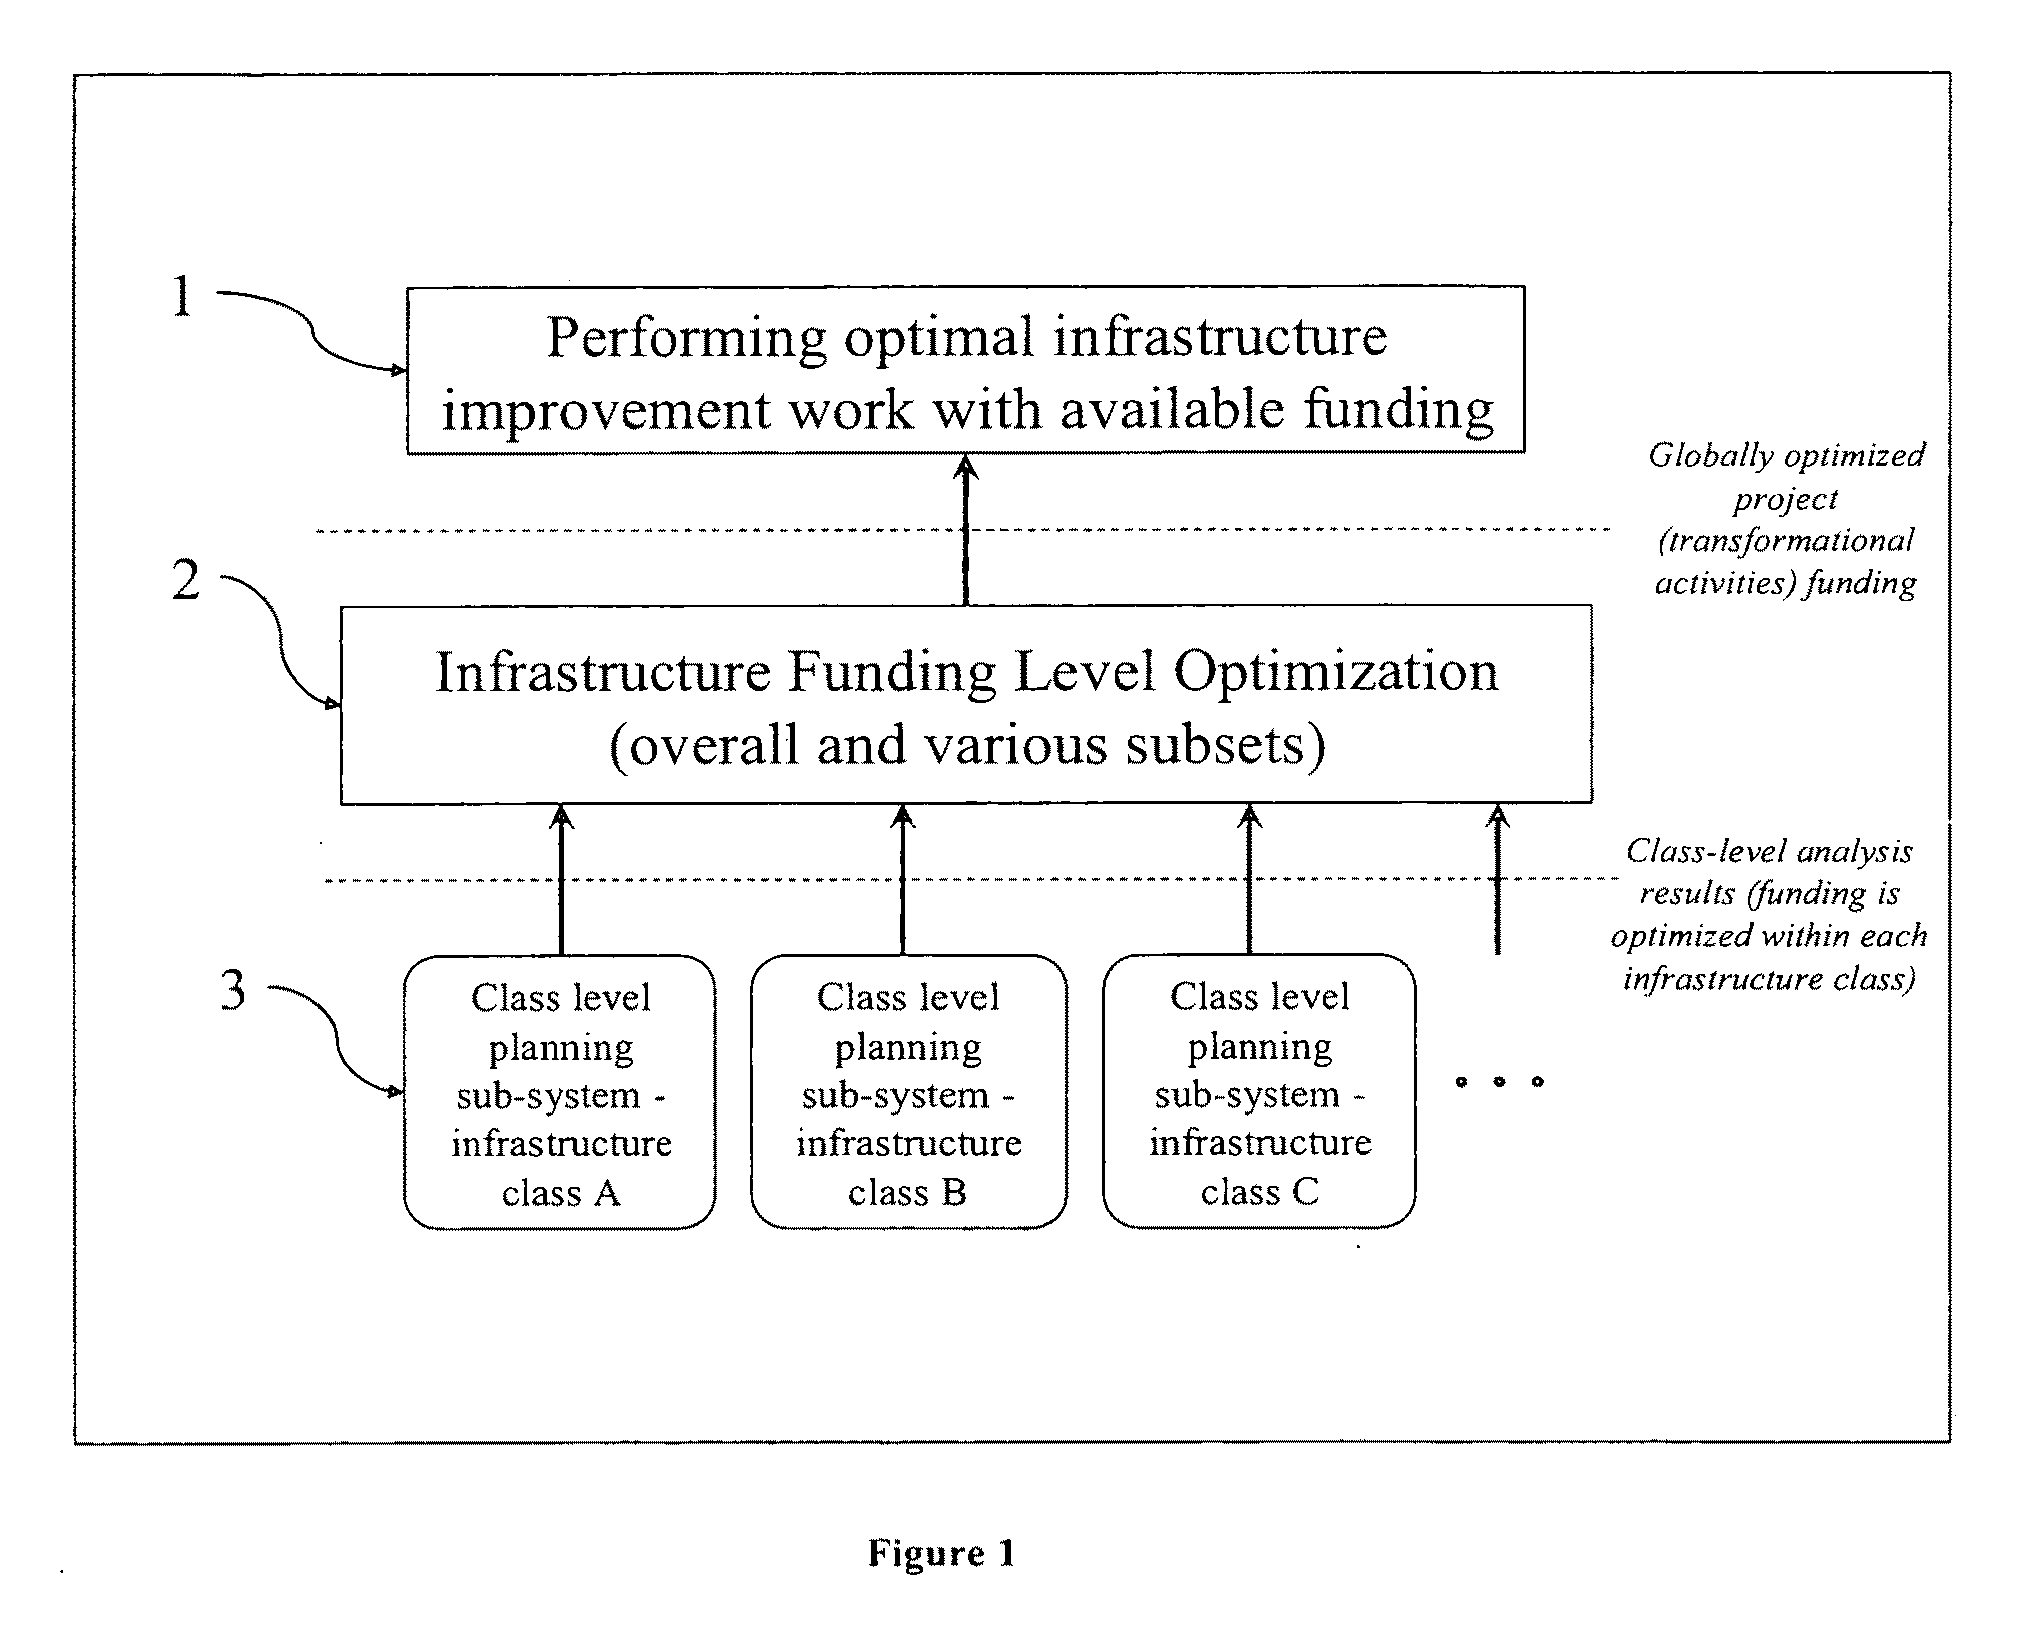 System and method for prioritizing the transformation activities to optimize the resulting infrastructure improvements